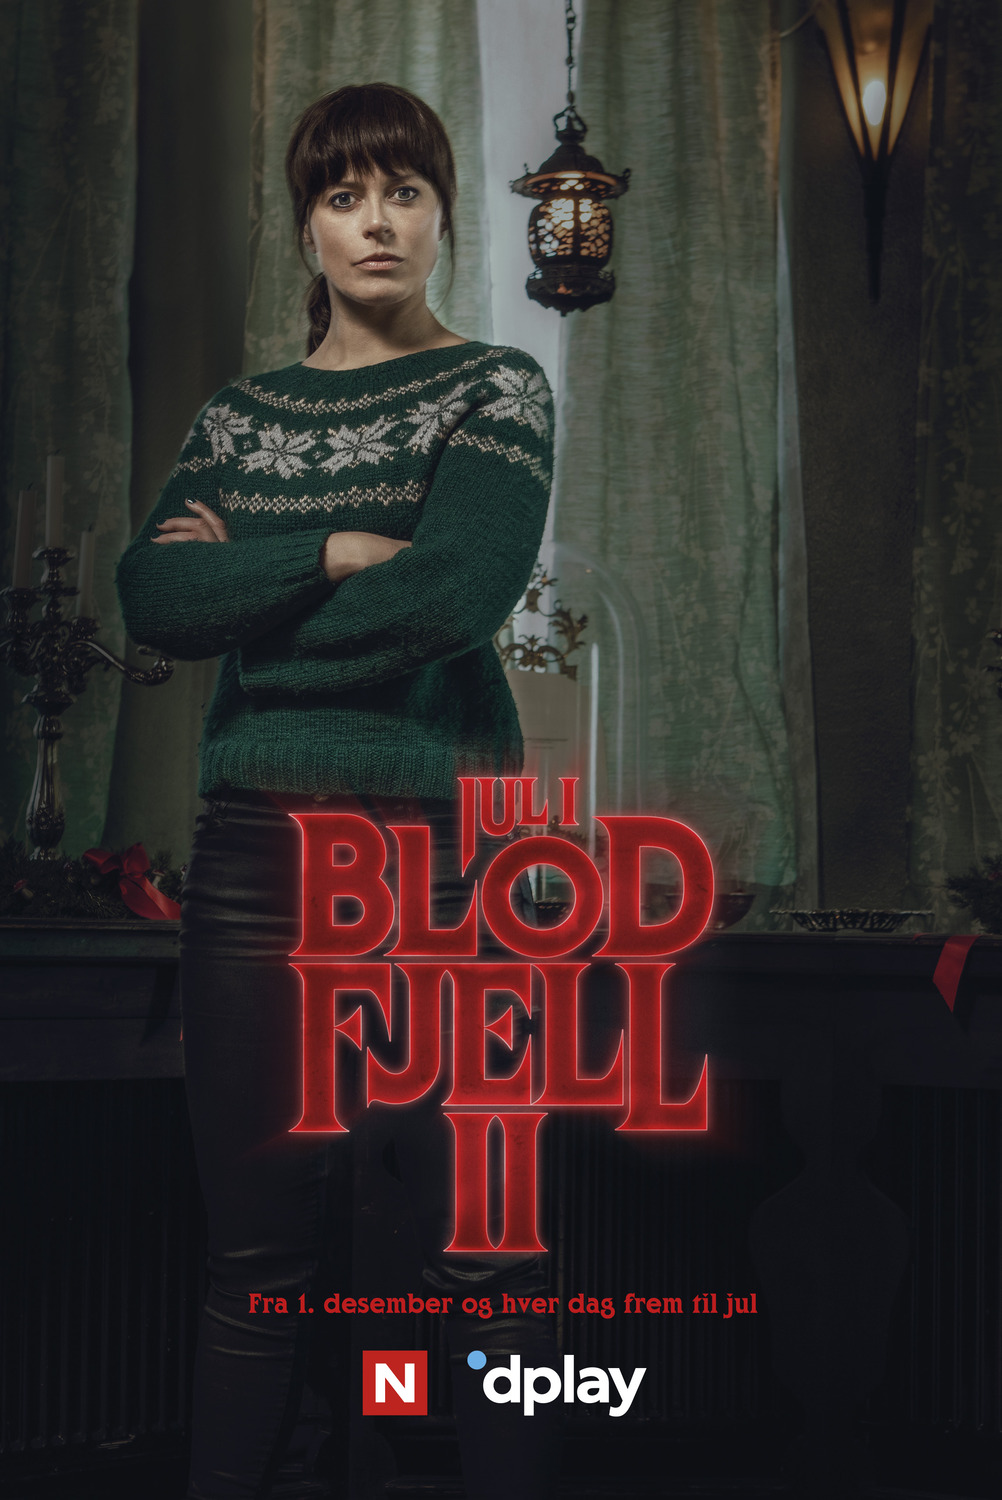 Extra Large TV Poster Image for Jul i Blodfjell (#4 of 11)